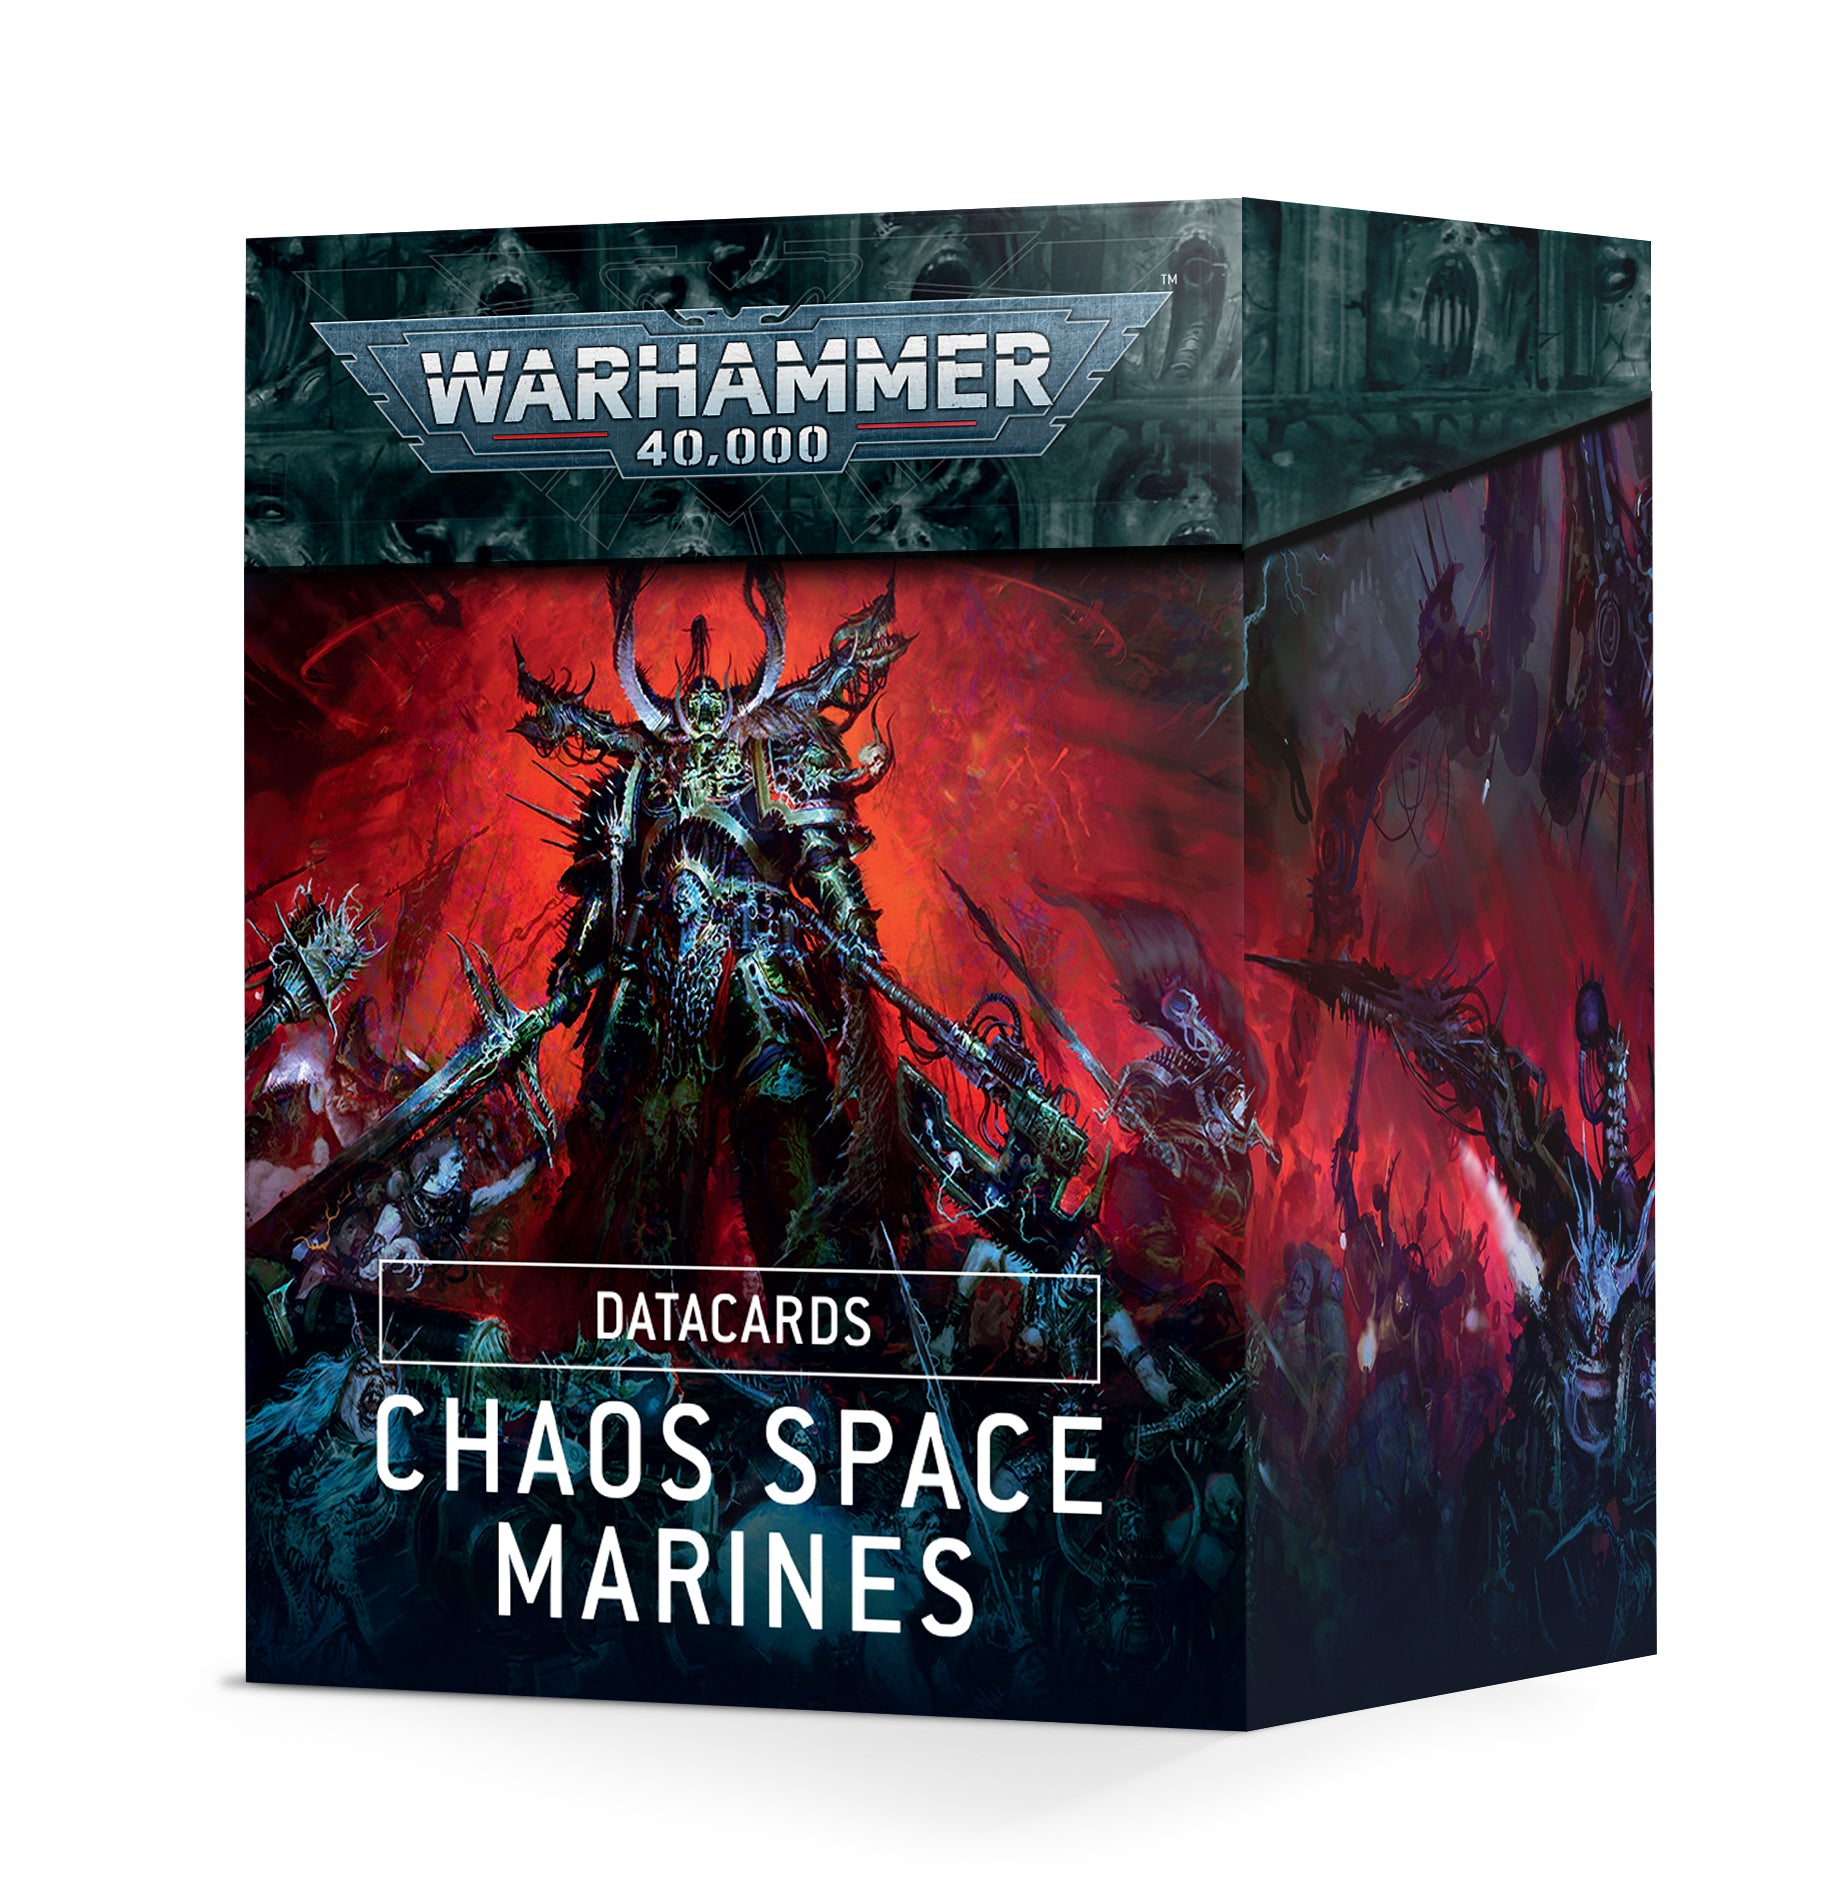 Warhammer 40k Datacards: Chaos Space Marines - Bards & Cards